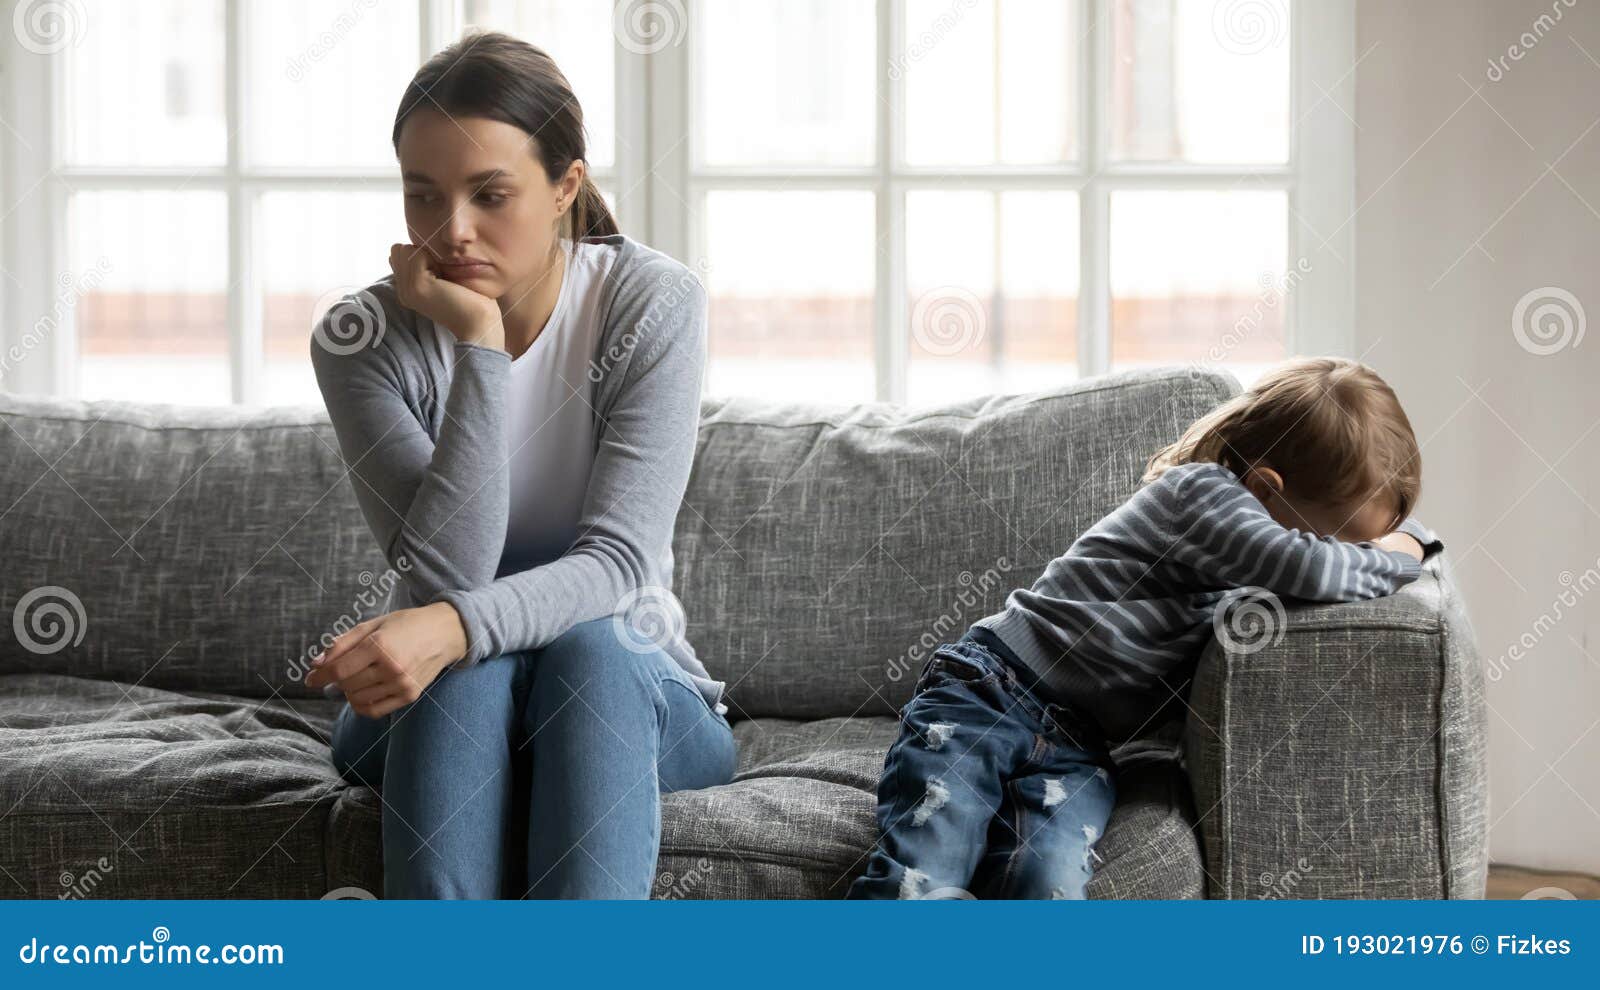 stressed young mommy sitting separate on couch with offended son.